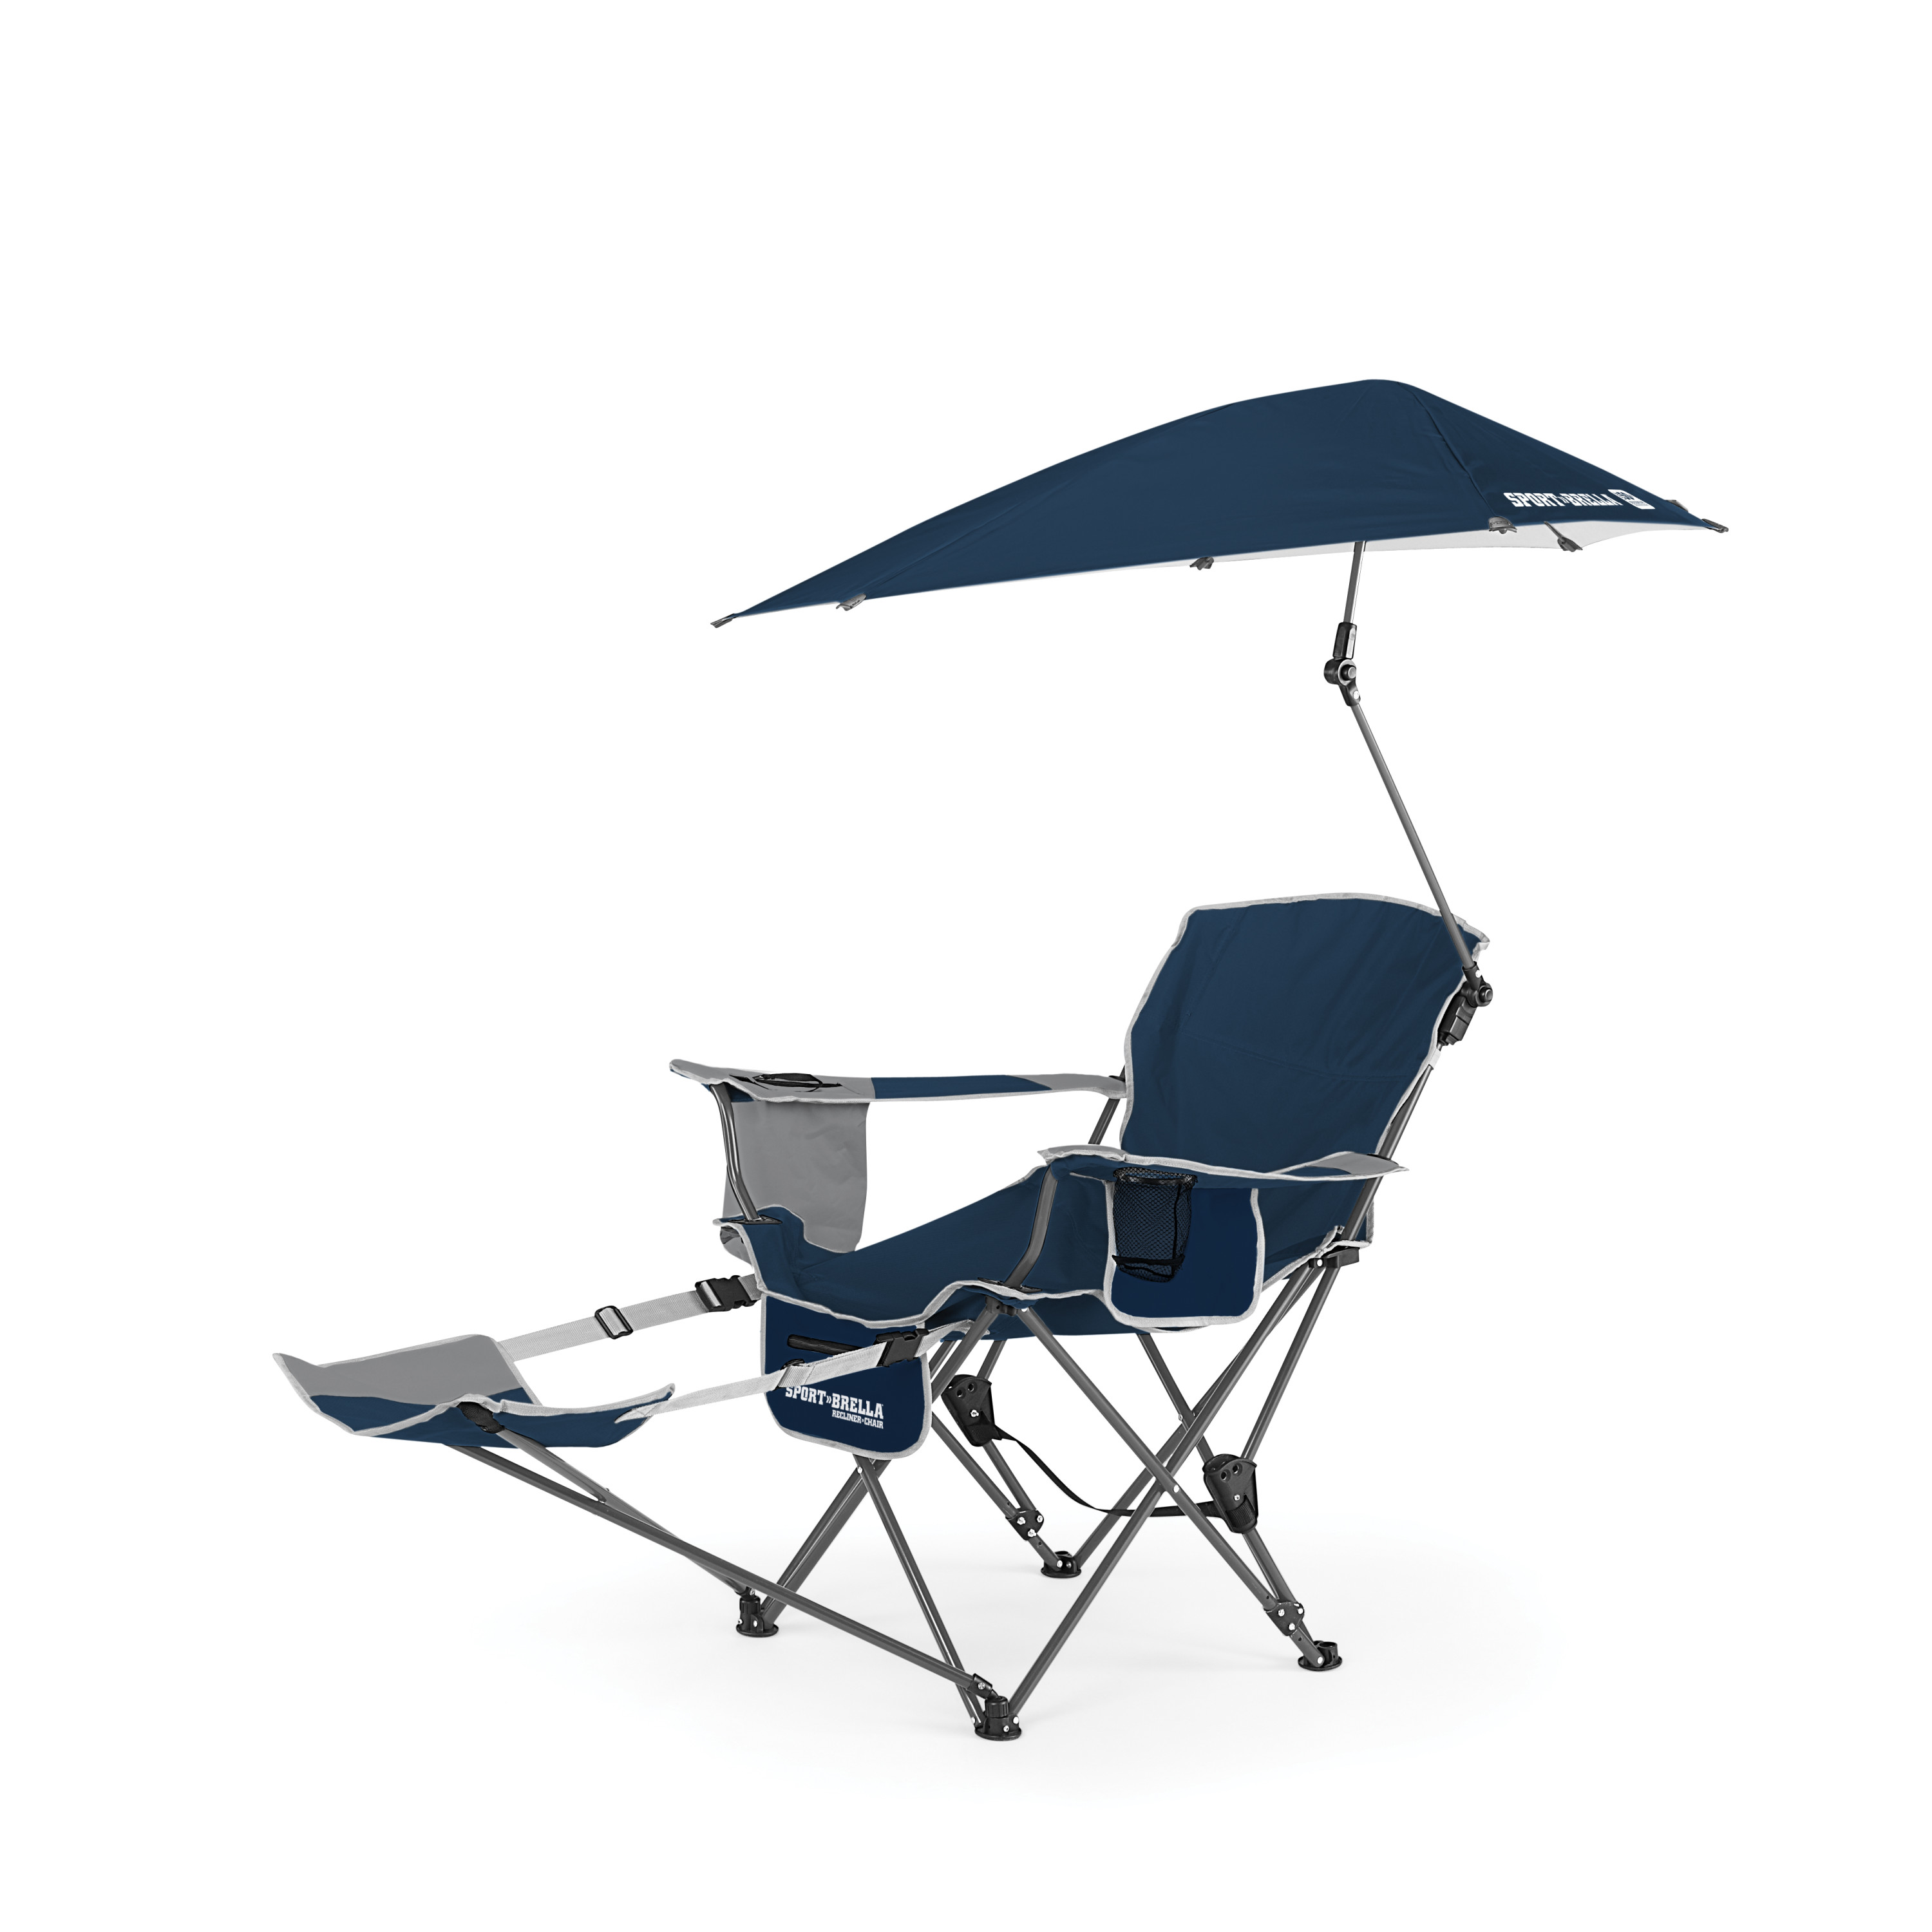 Sport-Brella Blue Camping Chair, with Clamp-On Sun Shade - image 1 of 8